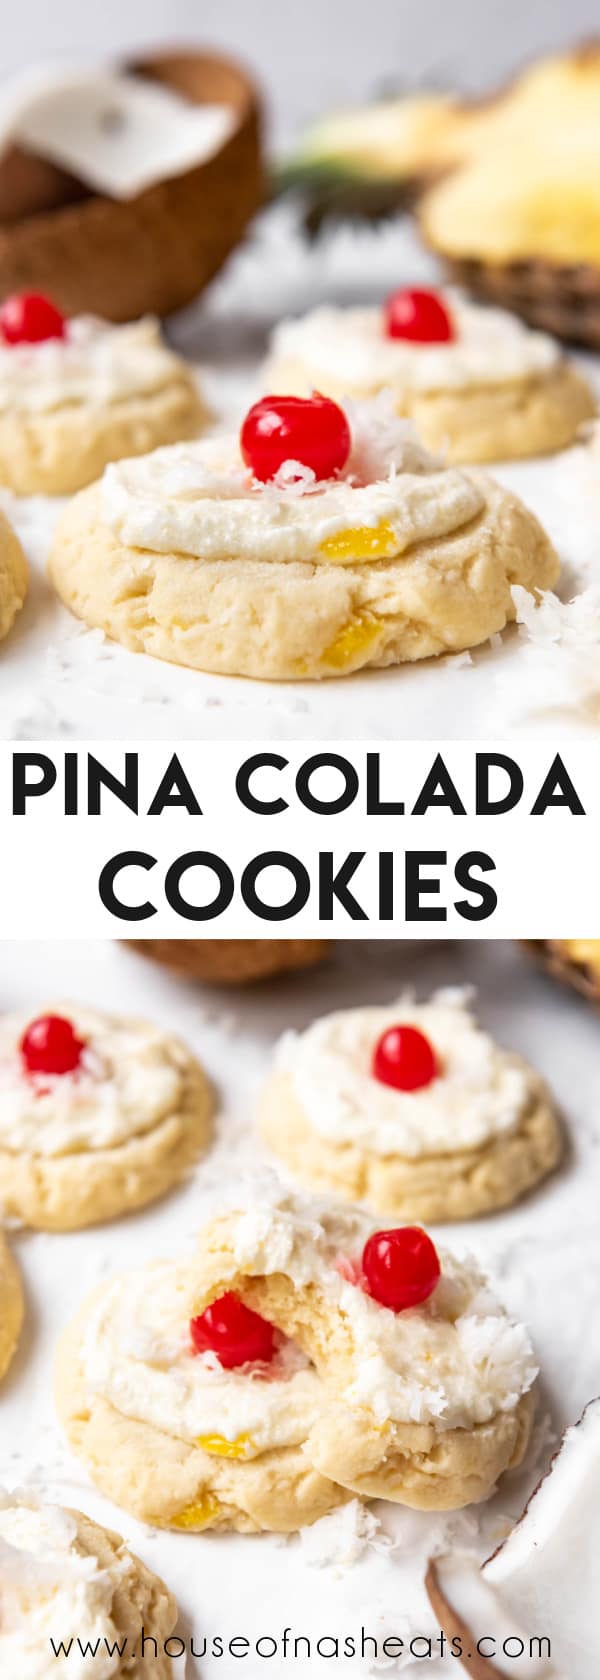 A collage of images of pina colada cookies with text overlay.